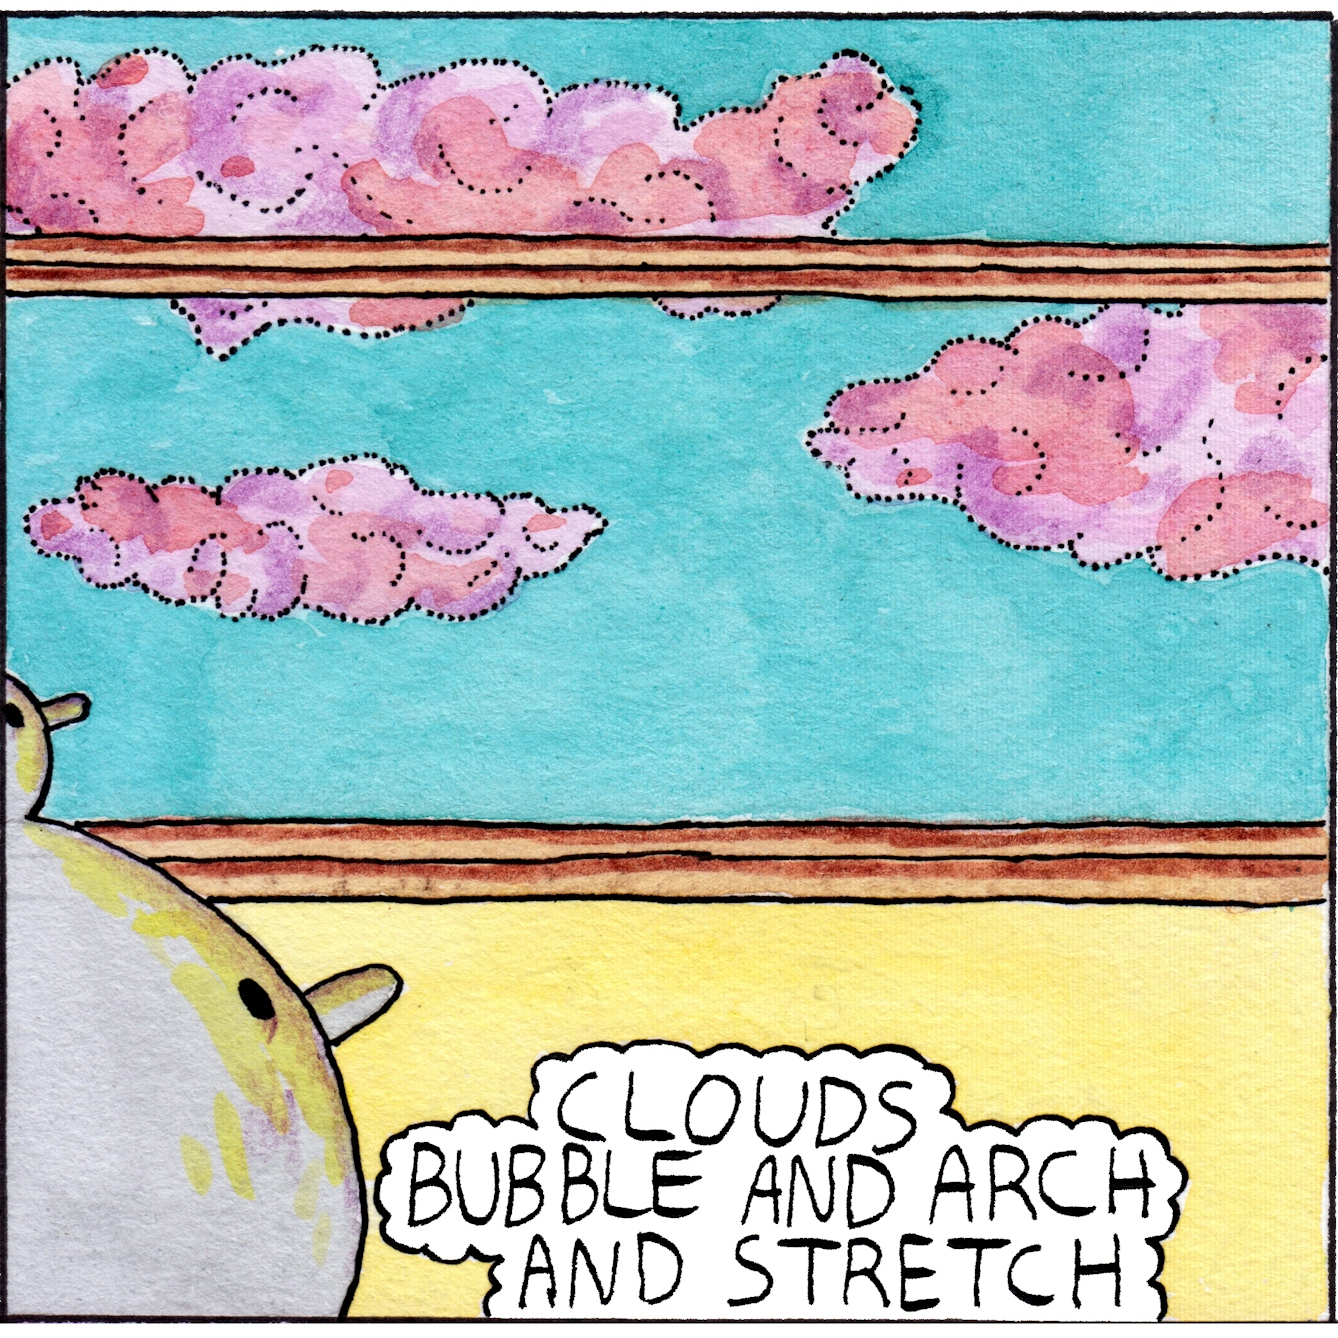 Panel two of the webcomic 'Unpaid break'. The two round heads of the character are looking up out of a large window that fills two-thirds of the panel. Outside is a turquoise scky and three fluffy pink clouds. The bottom third of the panel is a yellow wall. A speech cloud in front of the wall says "Clouds bubble and arch and stretch".